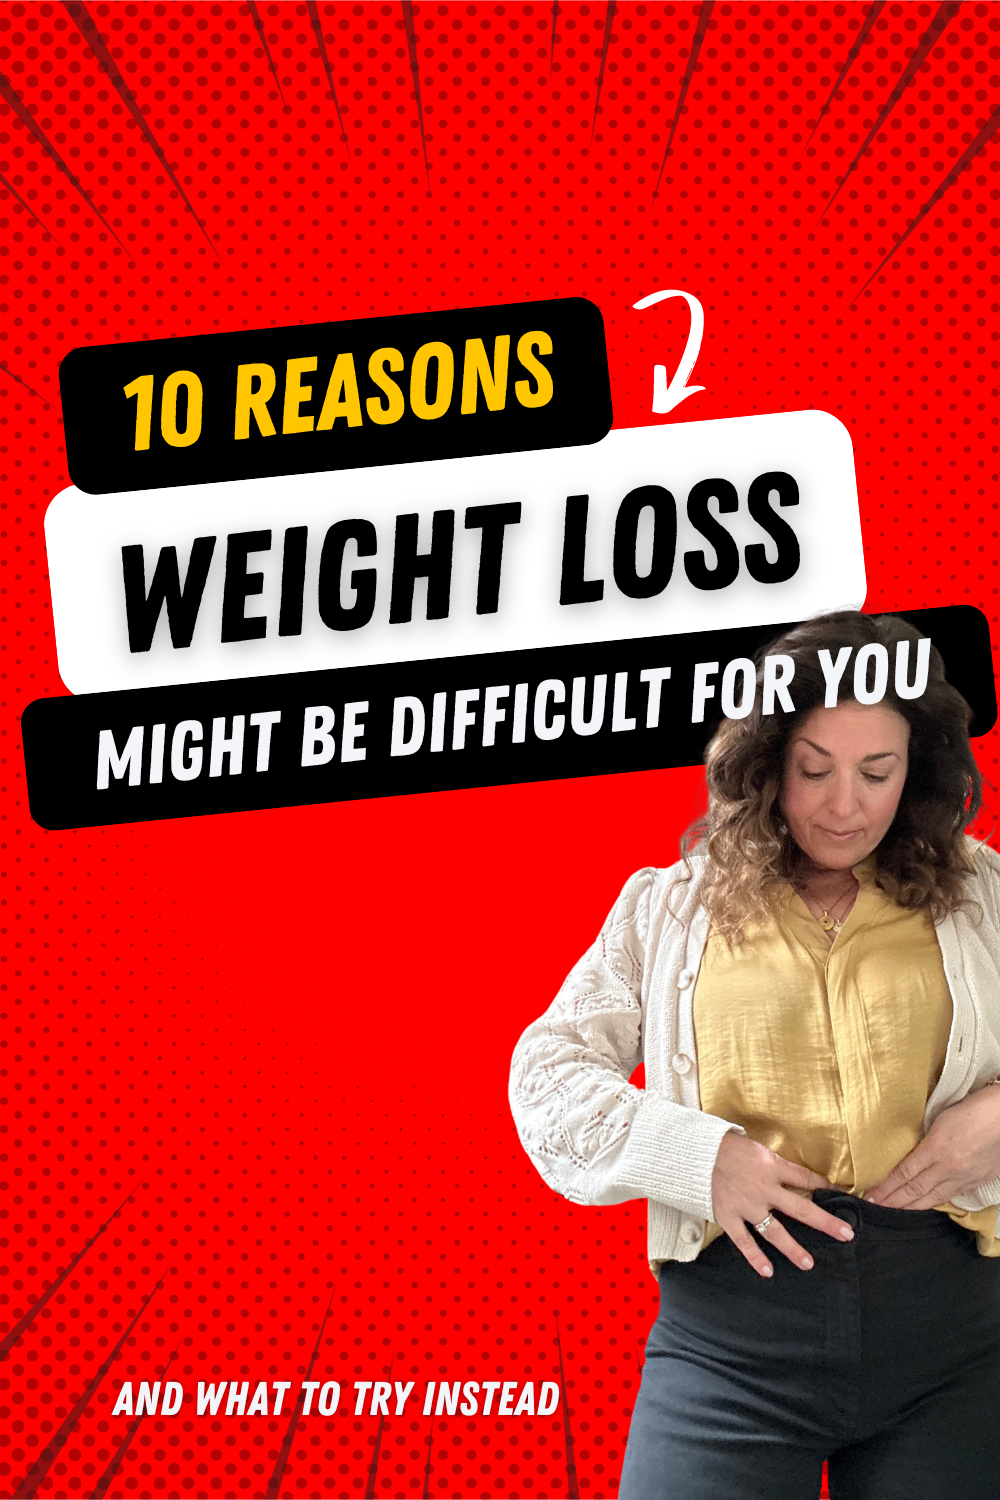 10 Reasons Weight Loss Could Be Difficult For You